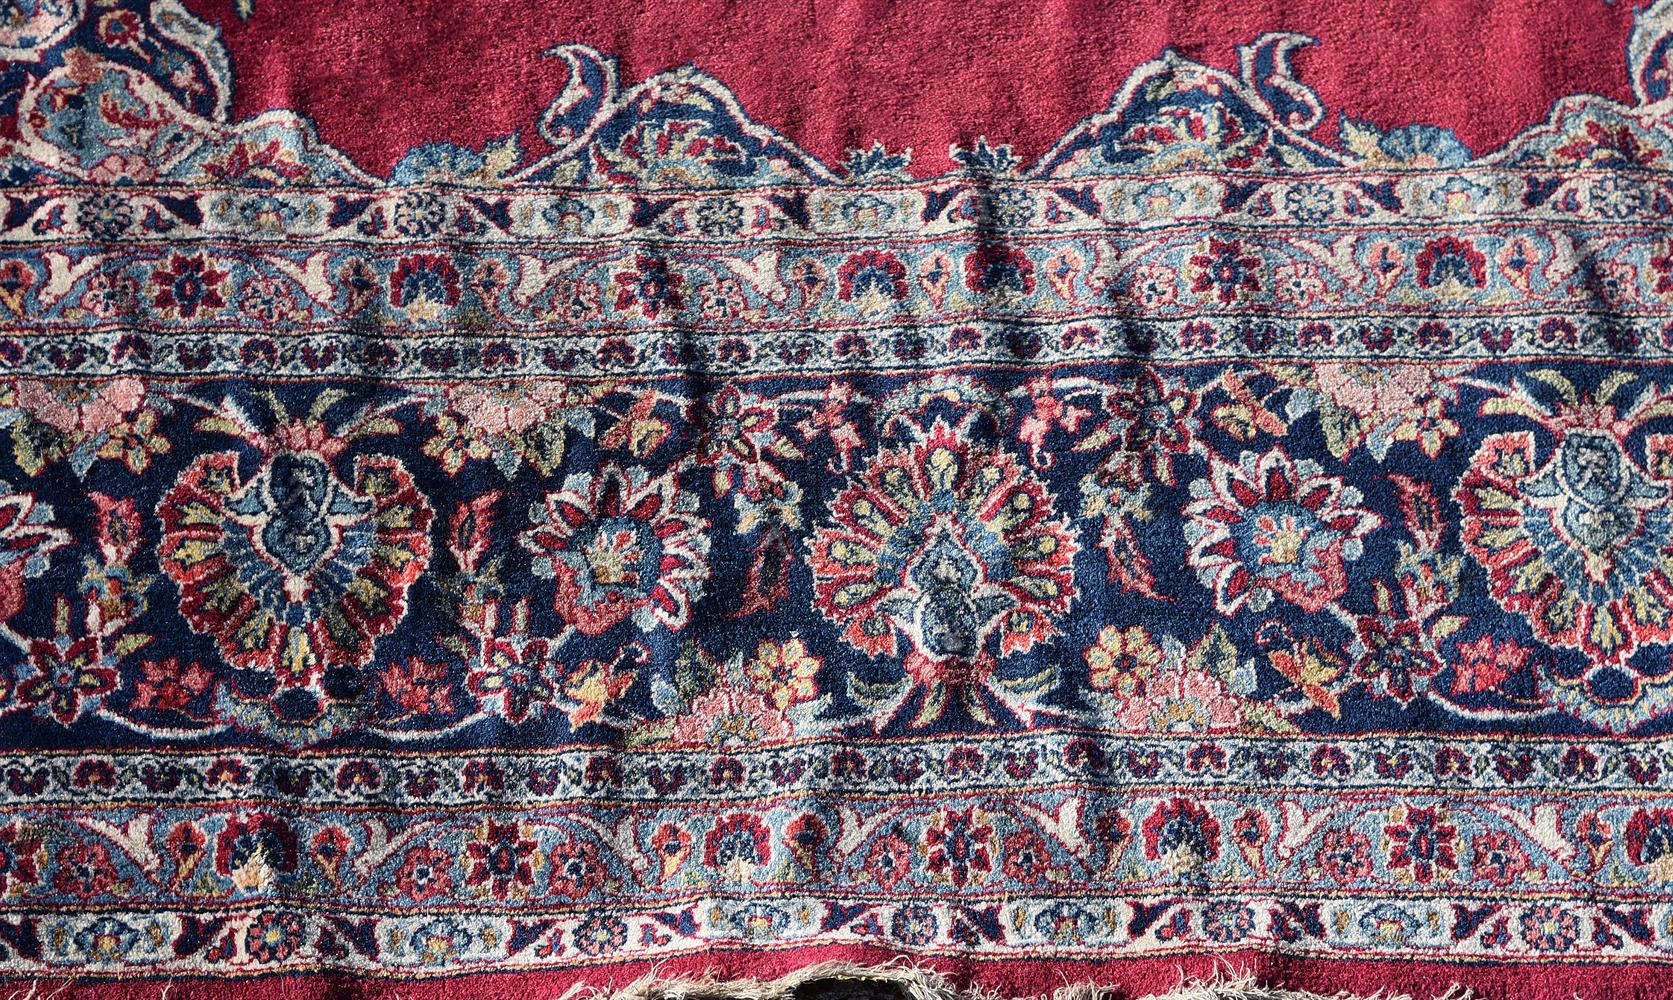 A PERSIAN CARPET, PROBABLY QUM, approximately 362 x 274cm - Image 3 of 3